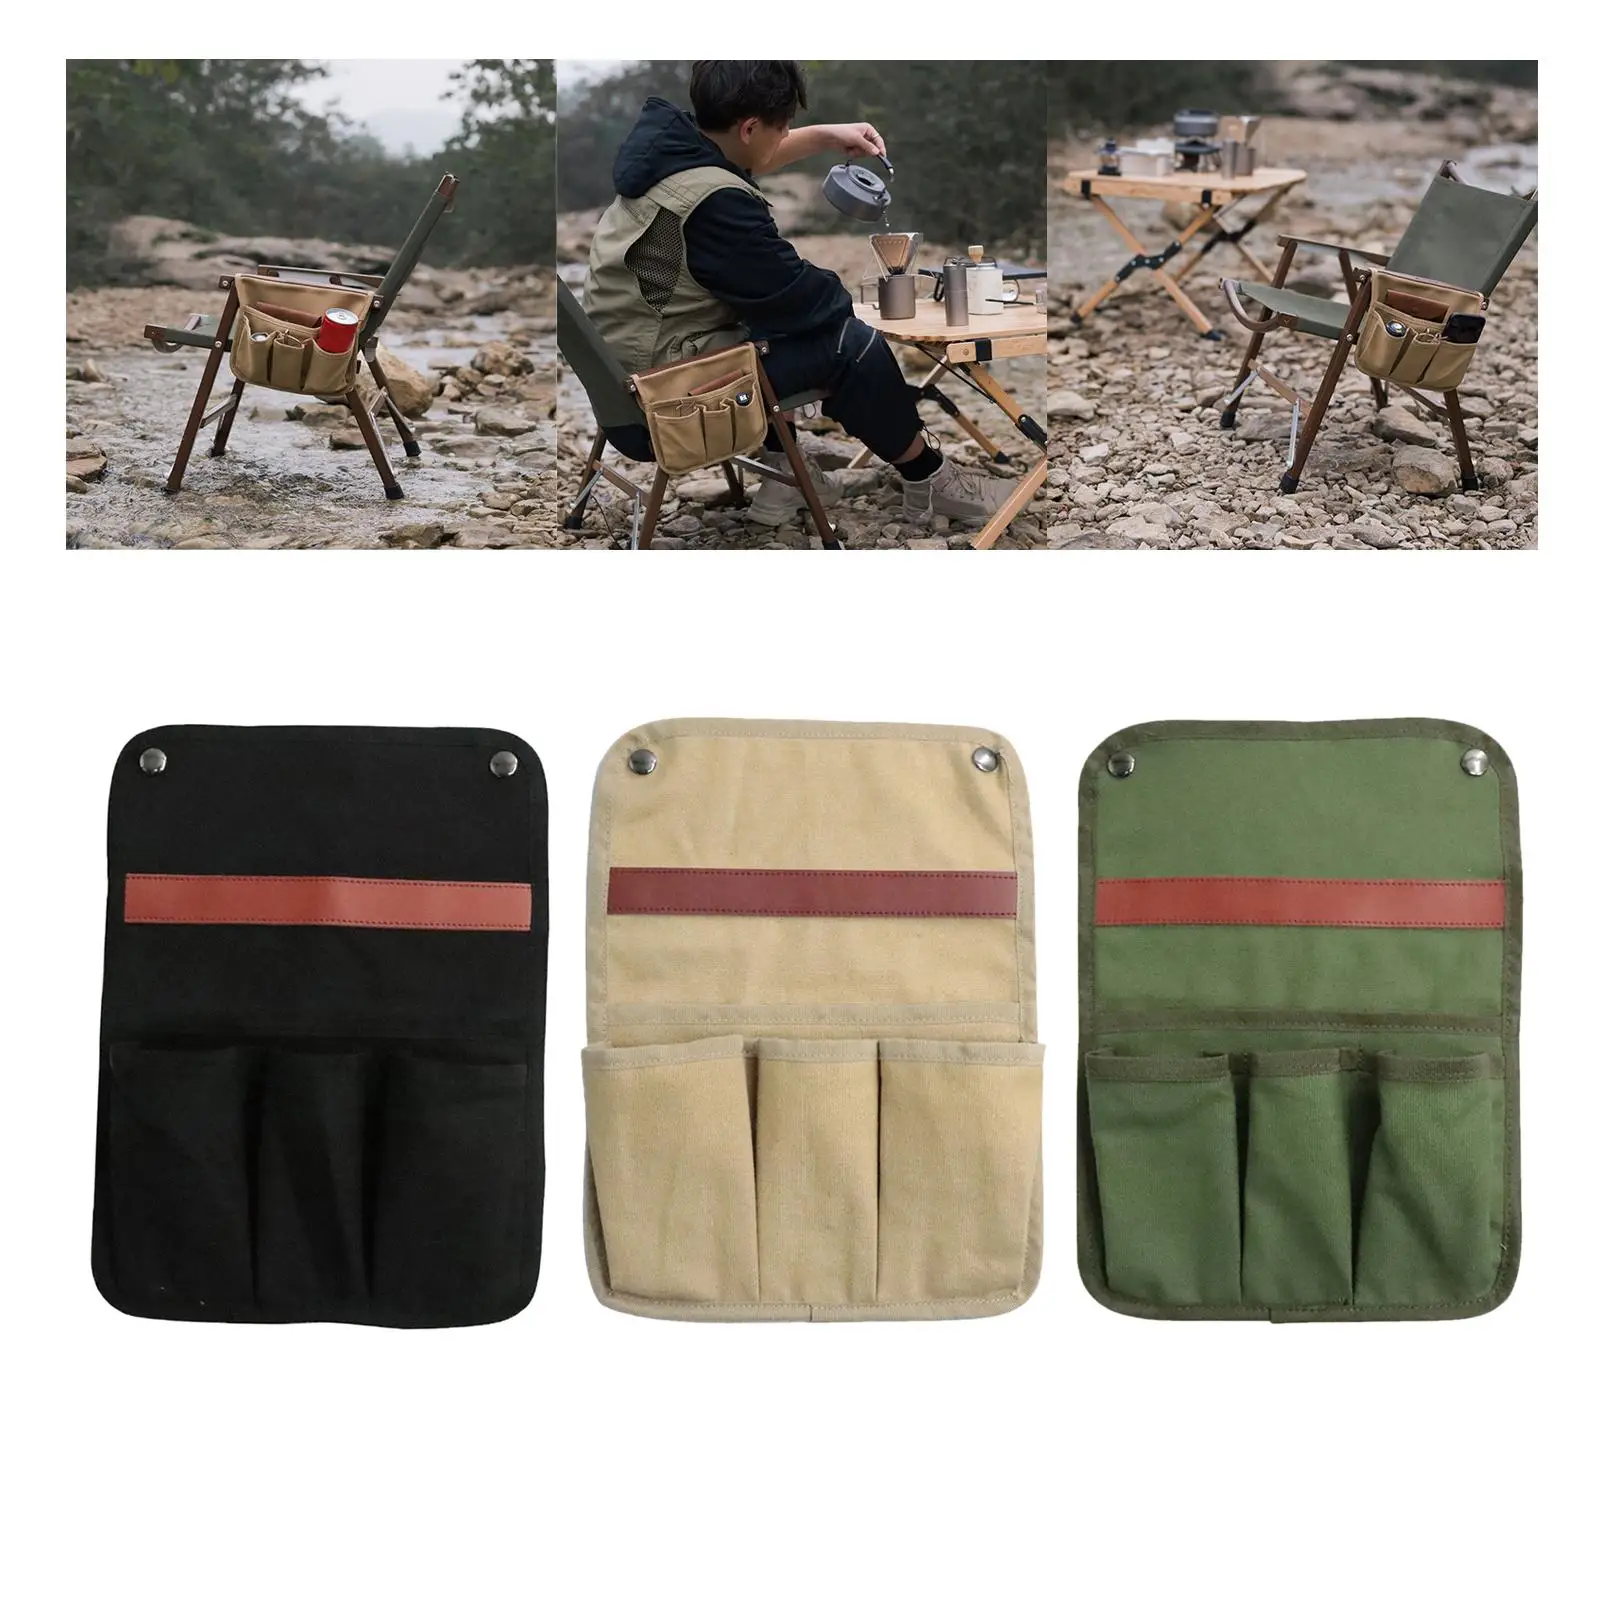 Outdoor Campsite Foldable Canvas Storage Bag Camping Fishing Beach Chaise Longue Portable Handbag for Phones Glasses